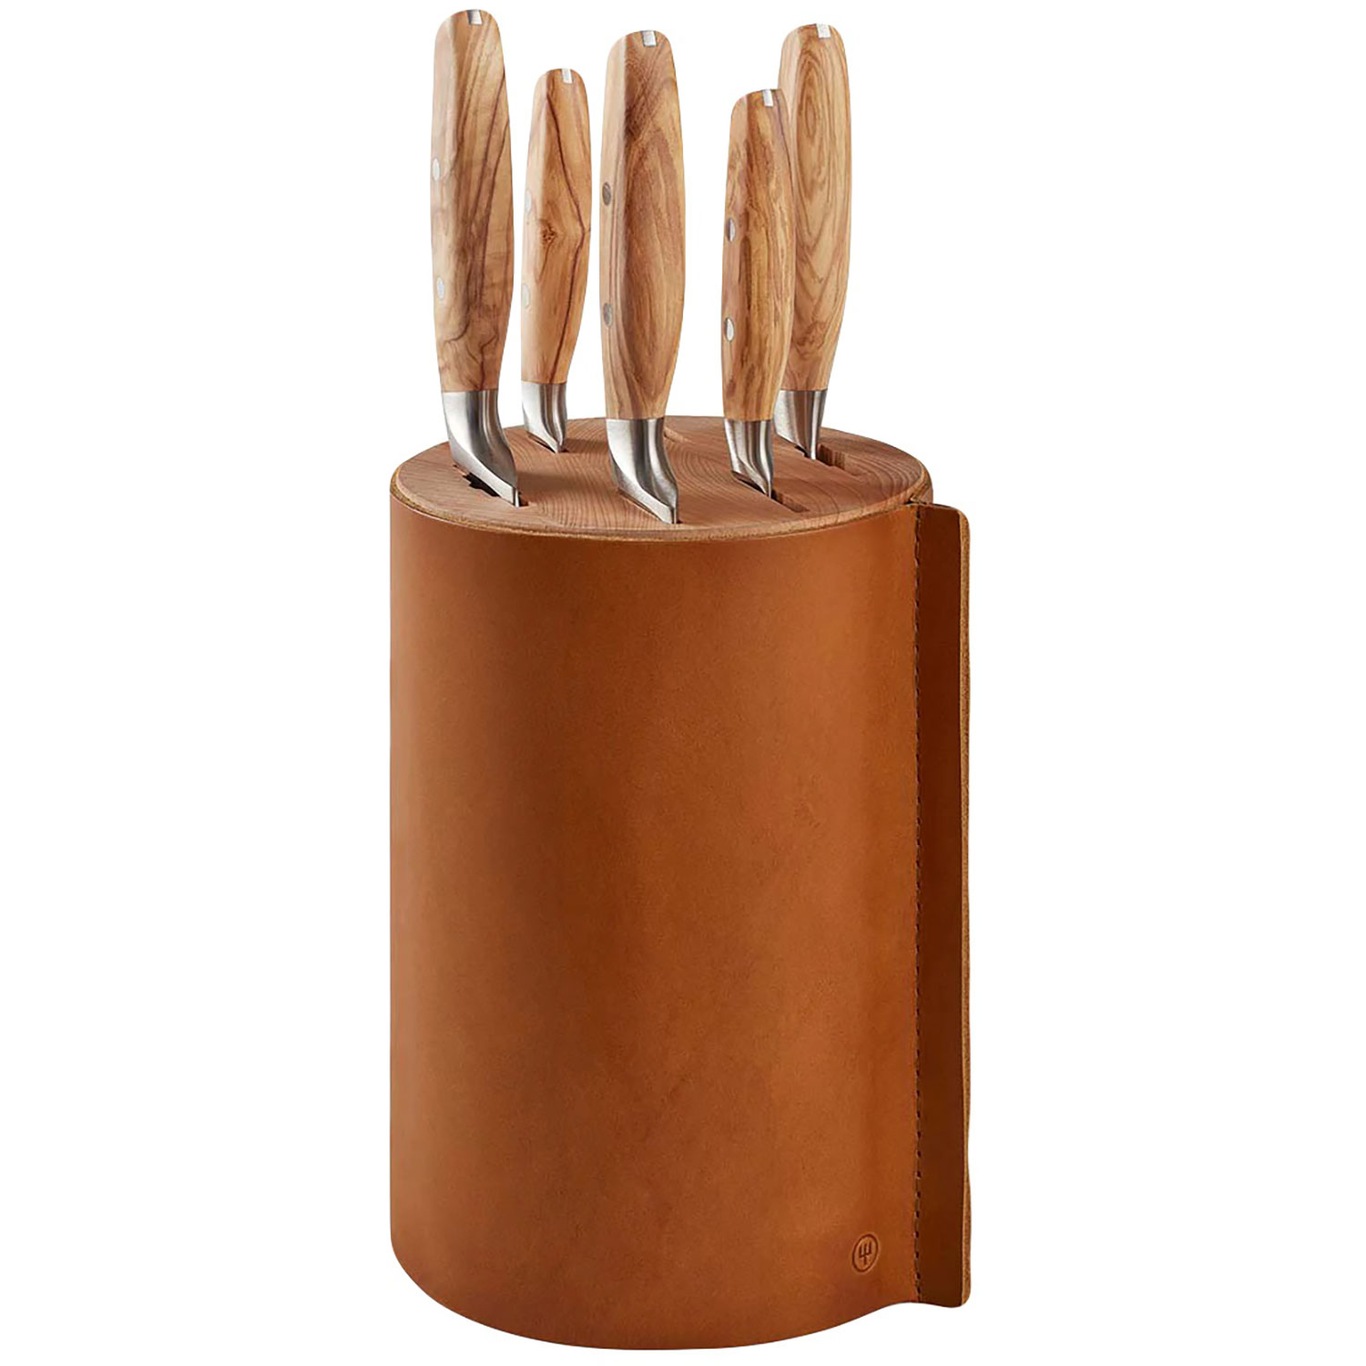 Amici Knife Block With Five Knives